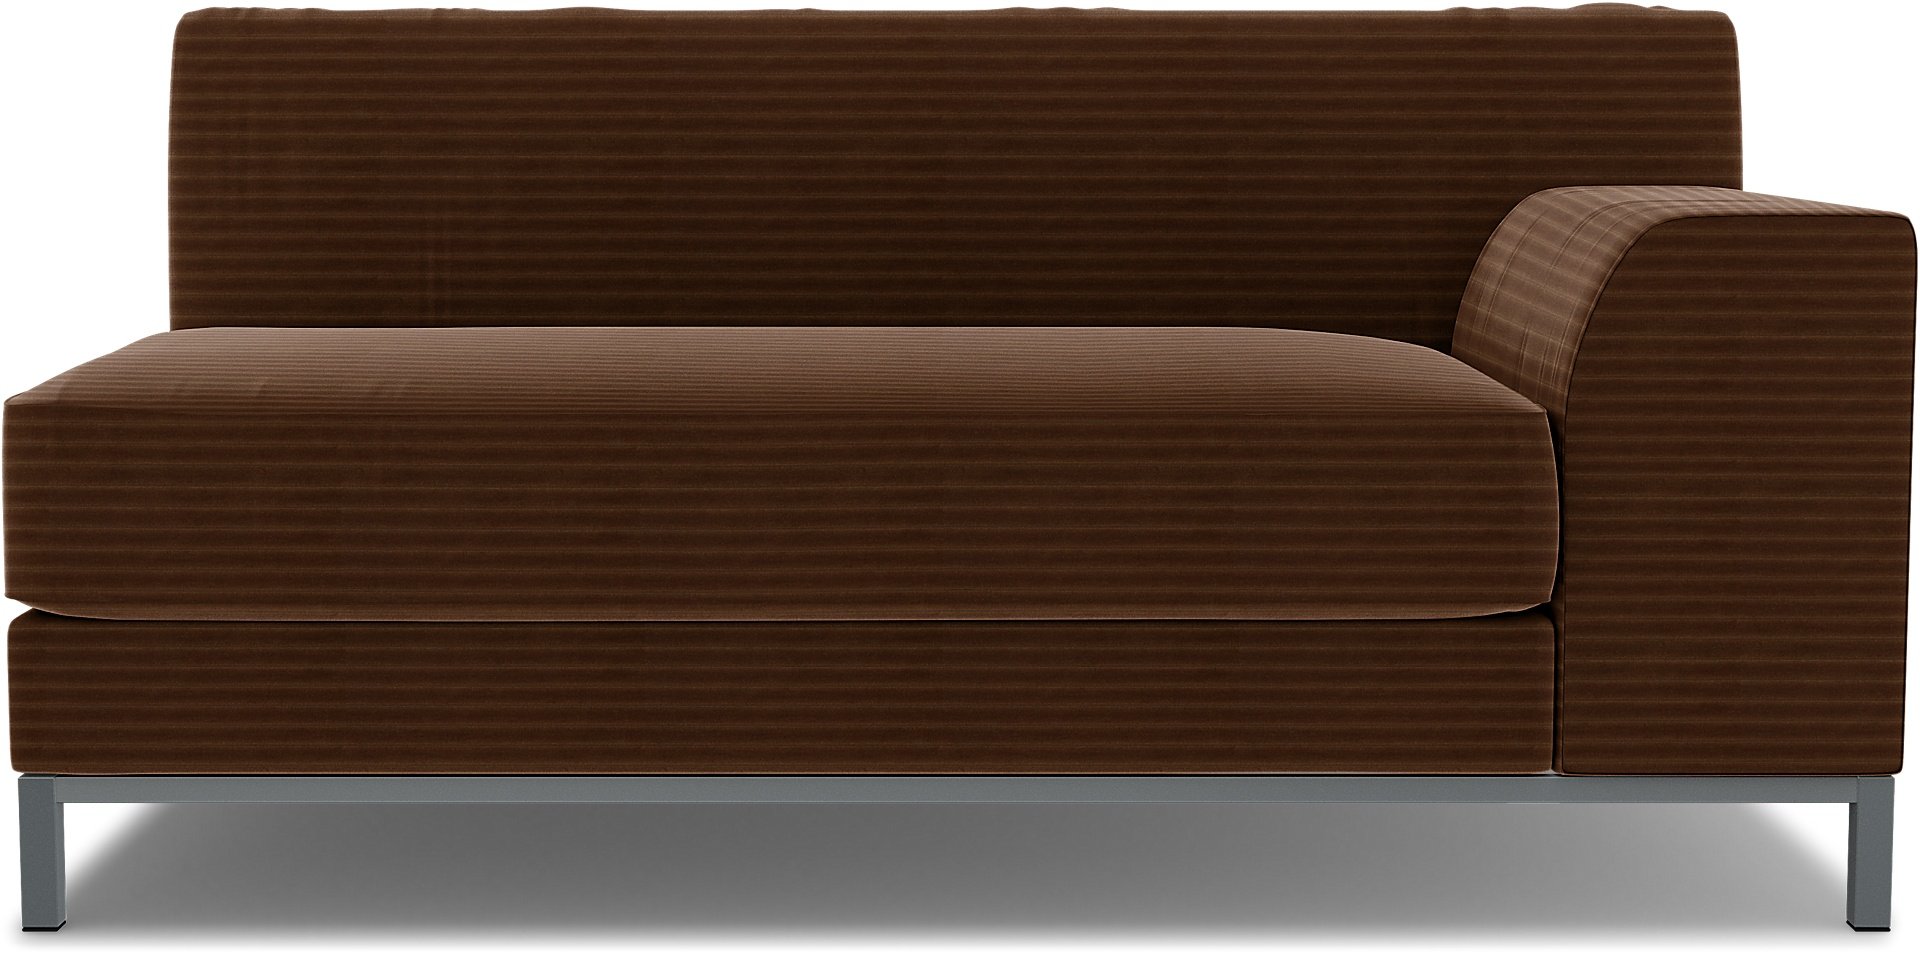 IKEA - Kramfors 2 Seater Sofa with Right Arm Cover, Chocolate Brown, Corduroy - Bemz